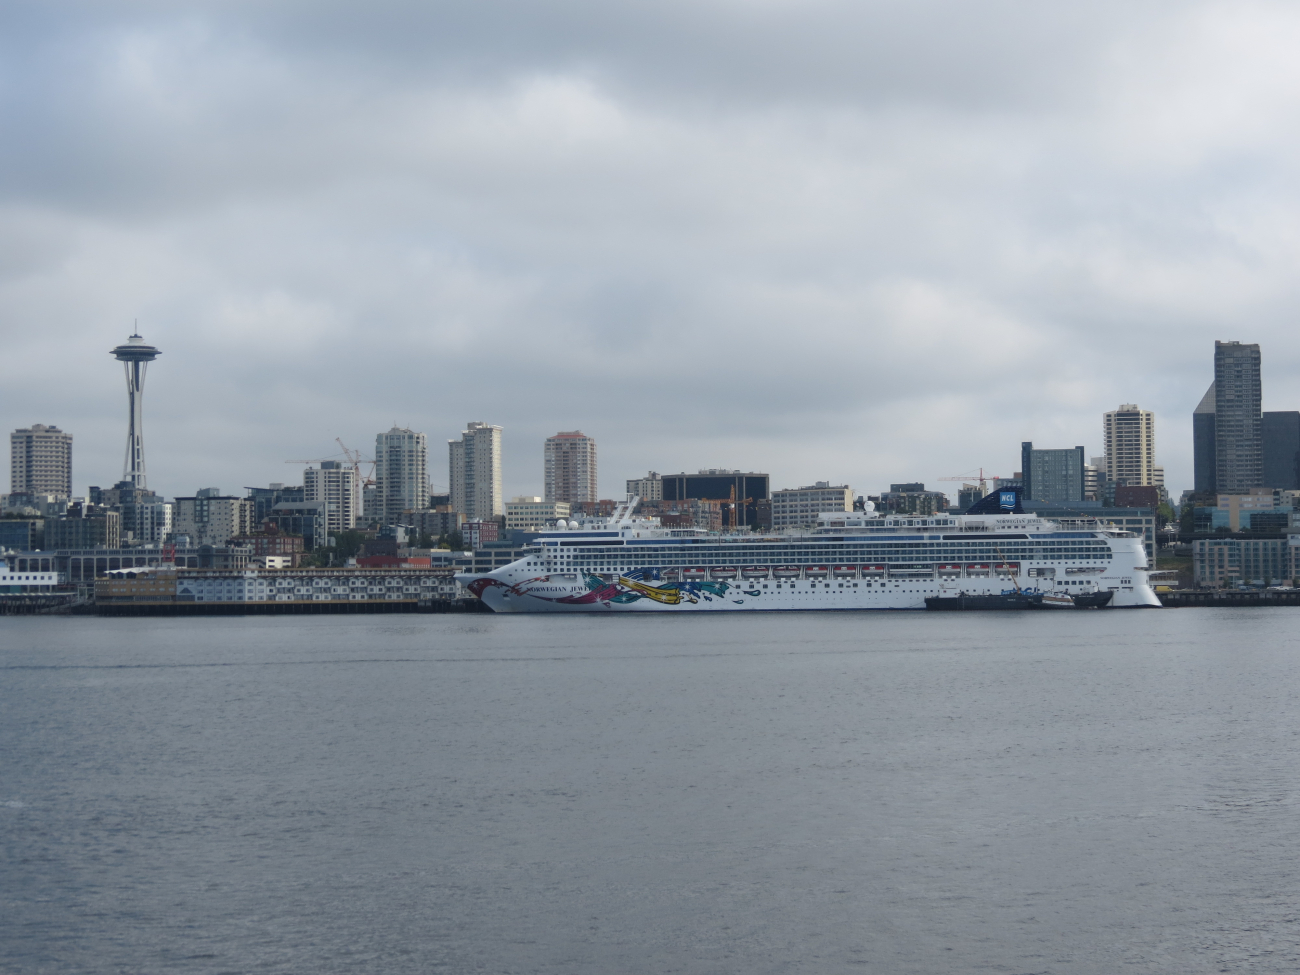 Seattle Space Needle and a large cruise ship, the NORWEGIANJEWEL, on the Seattle waterfront